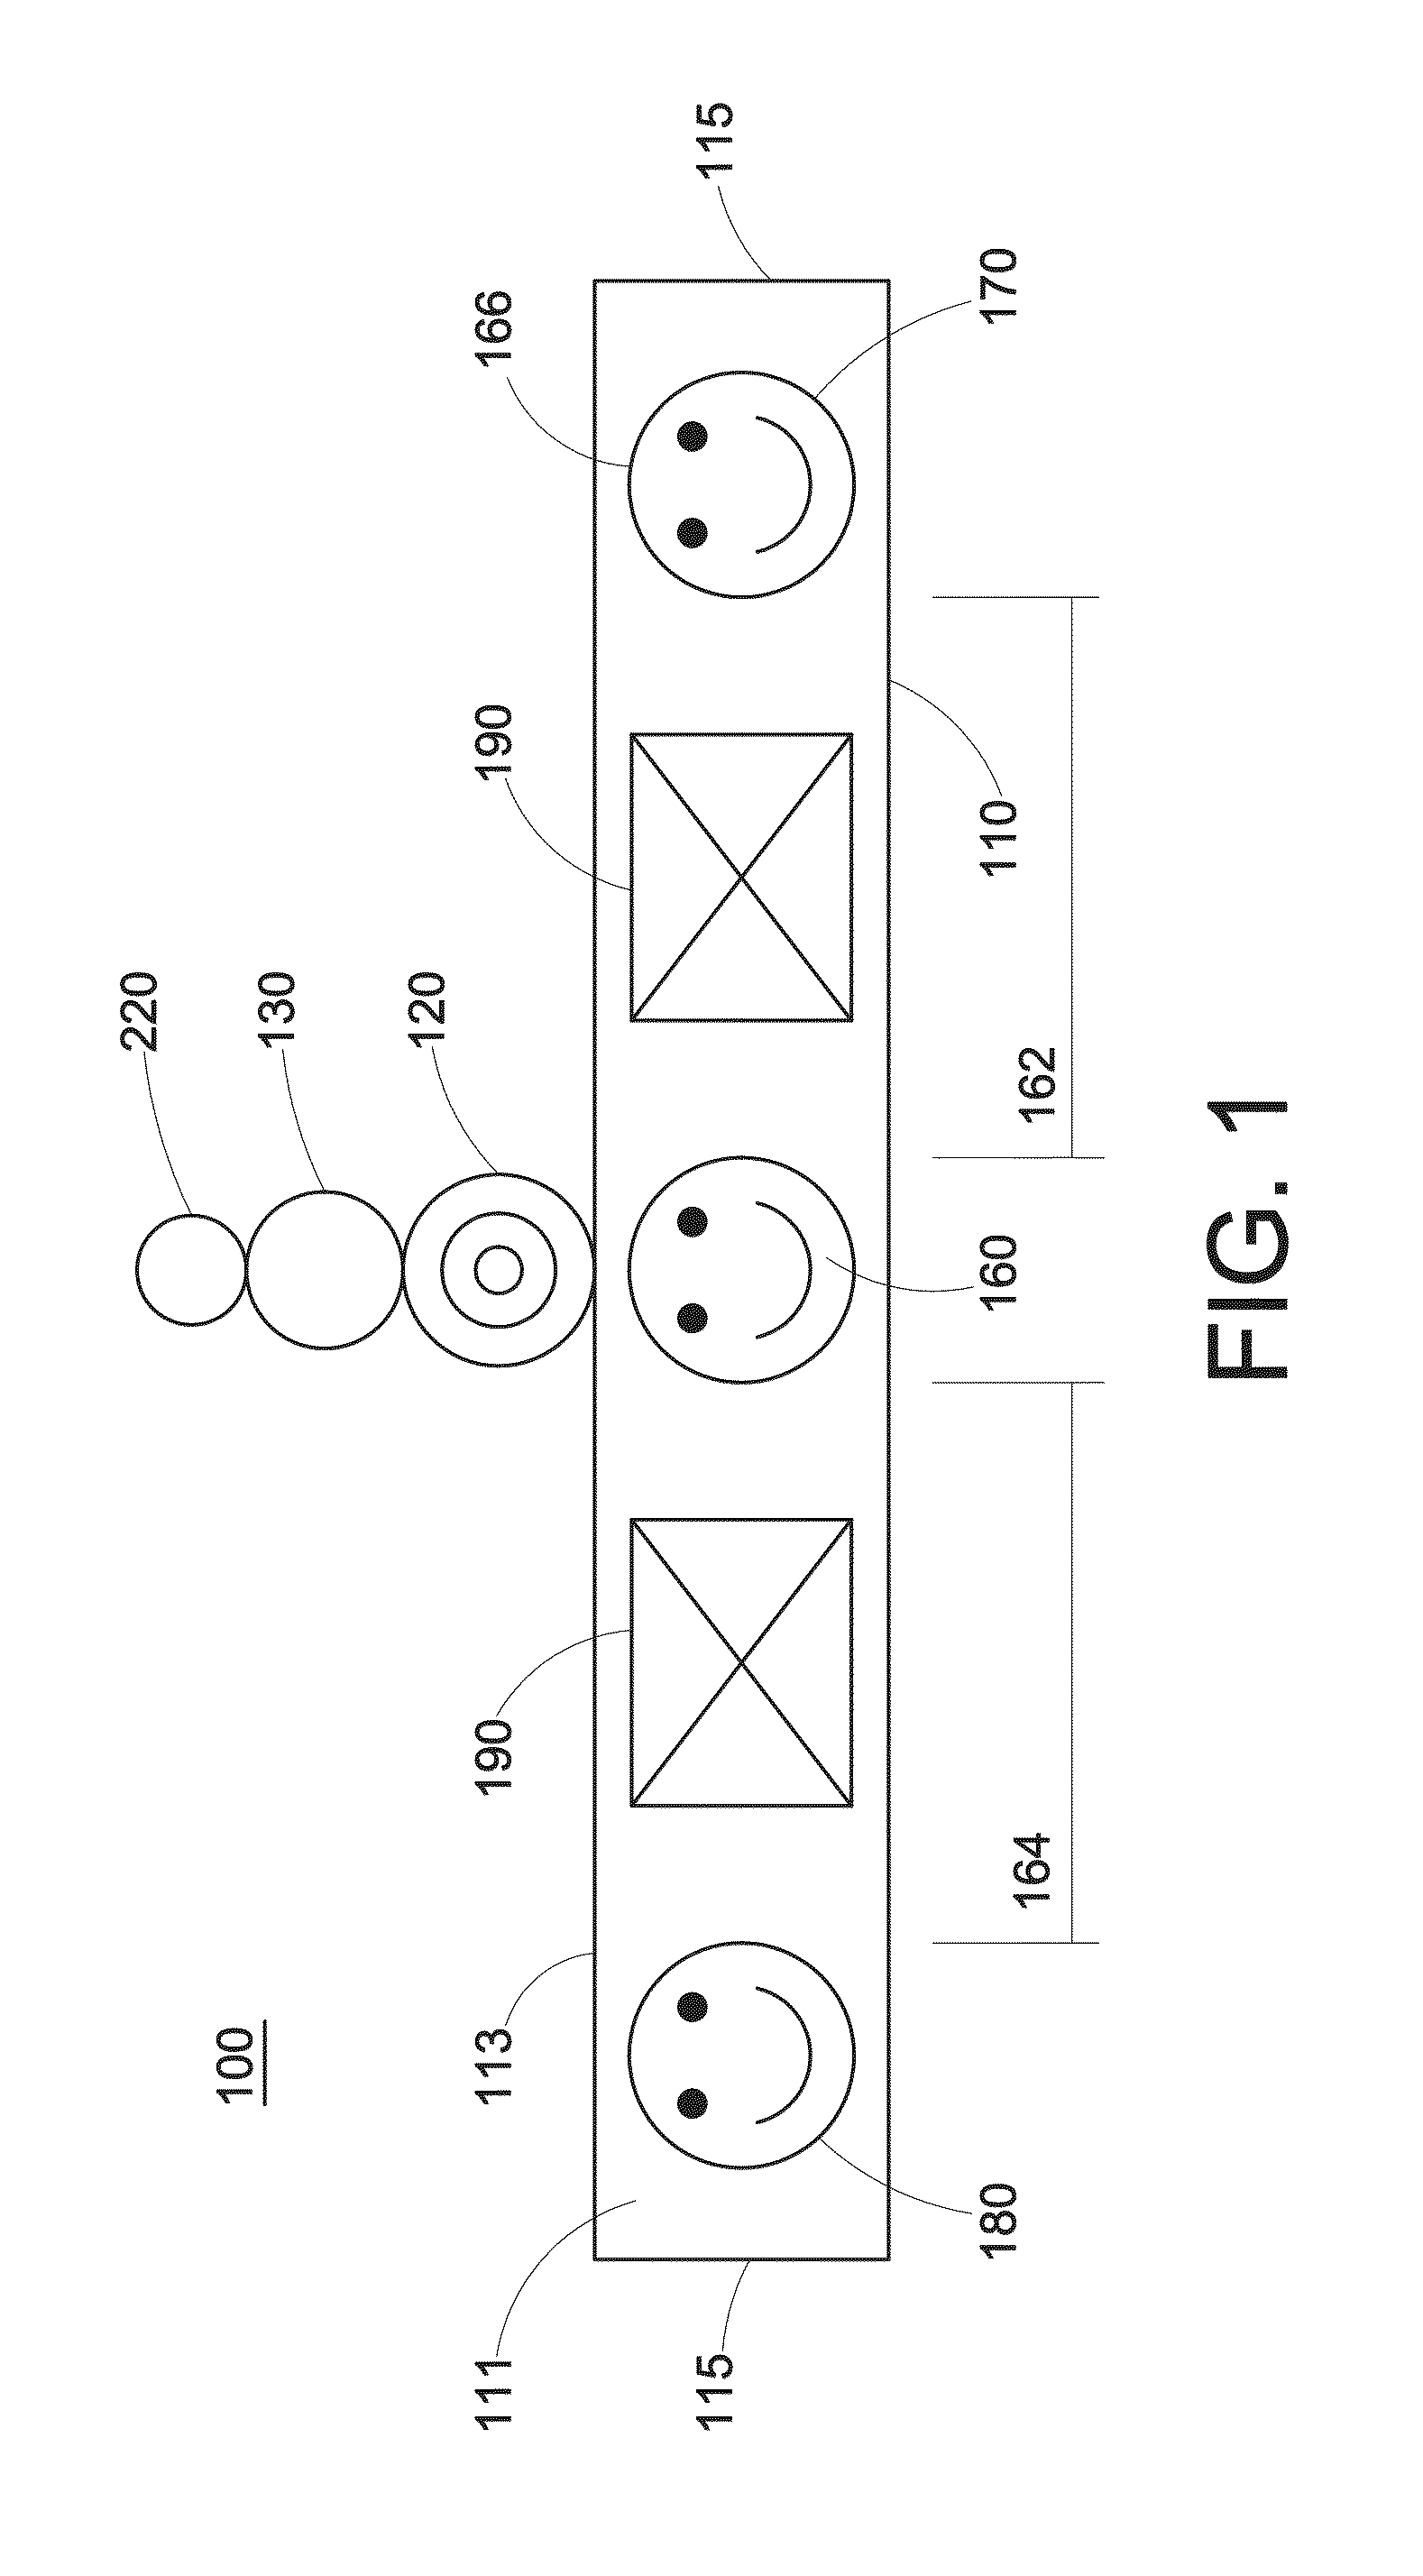 Apparatus and methods for diagnosis of strabismus